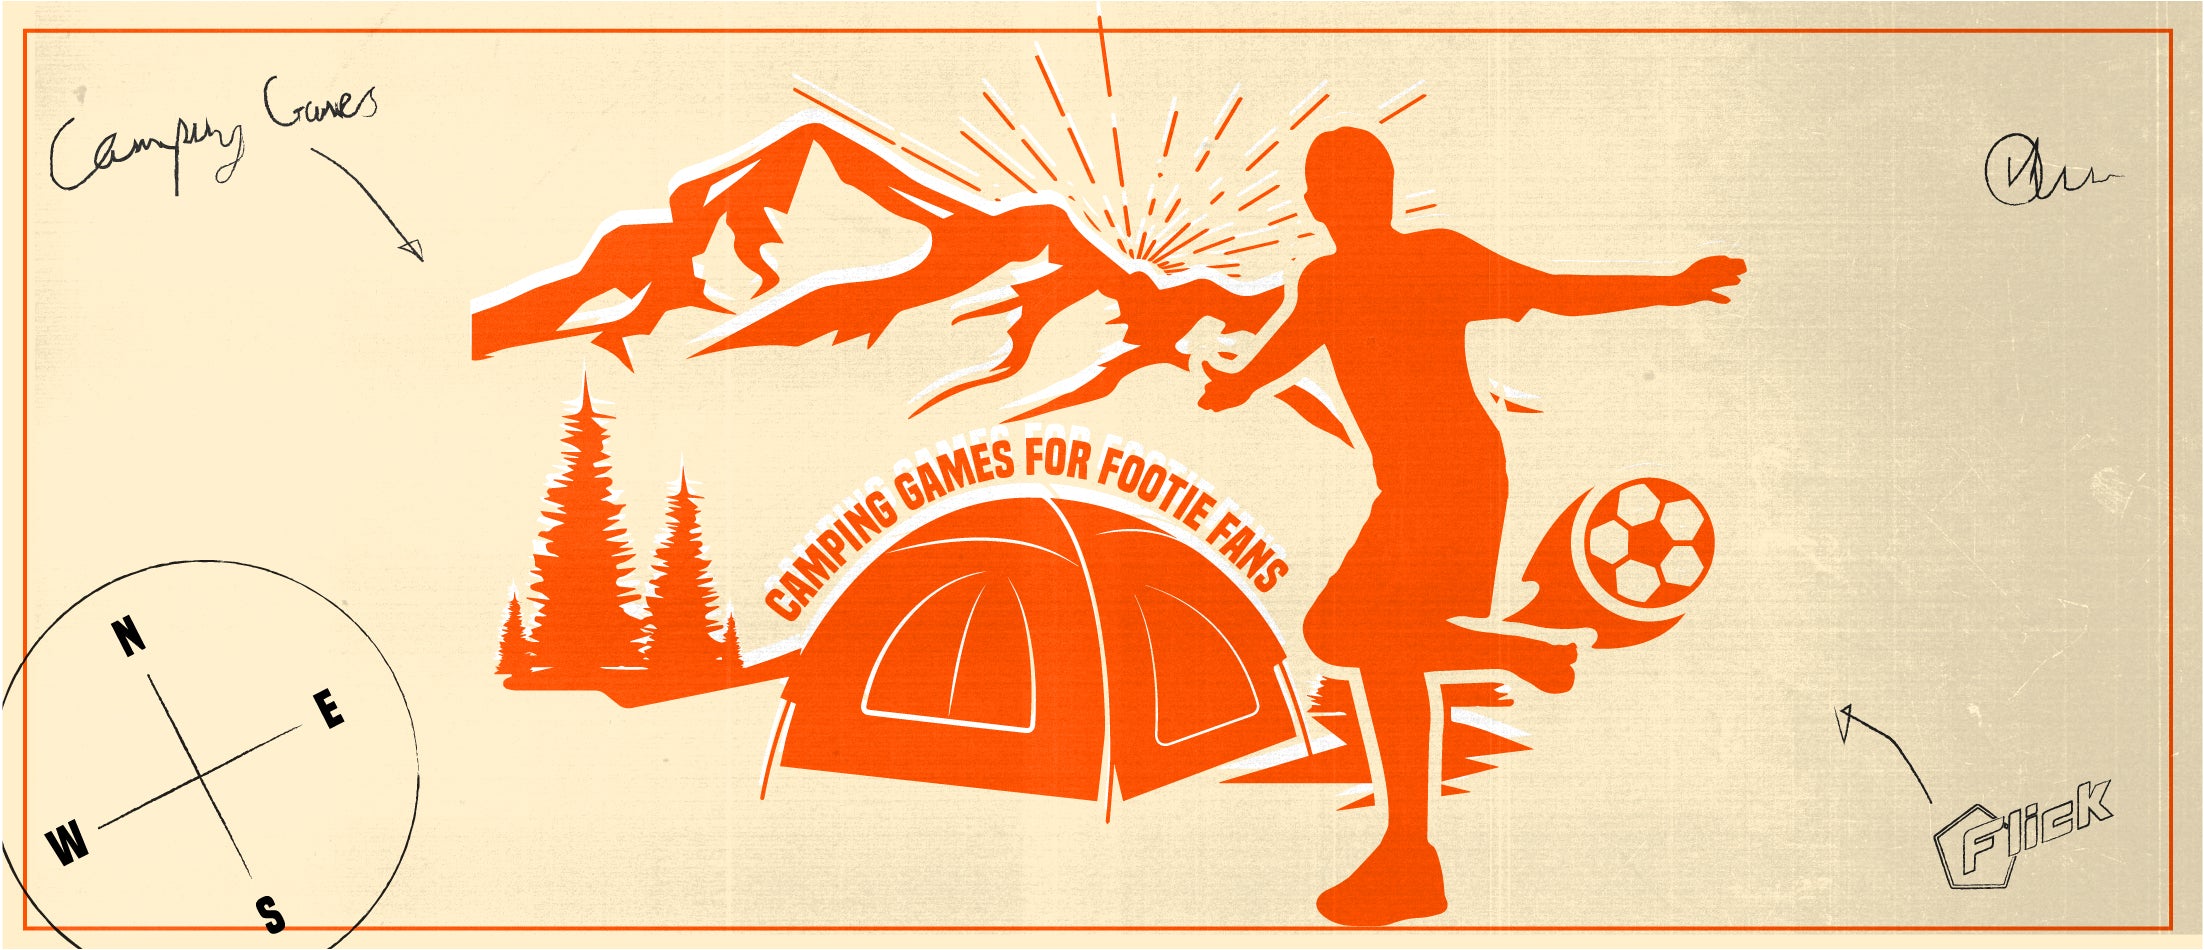 The Best Camping Games For Football Fans